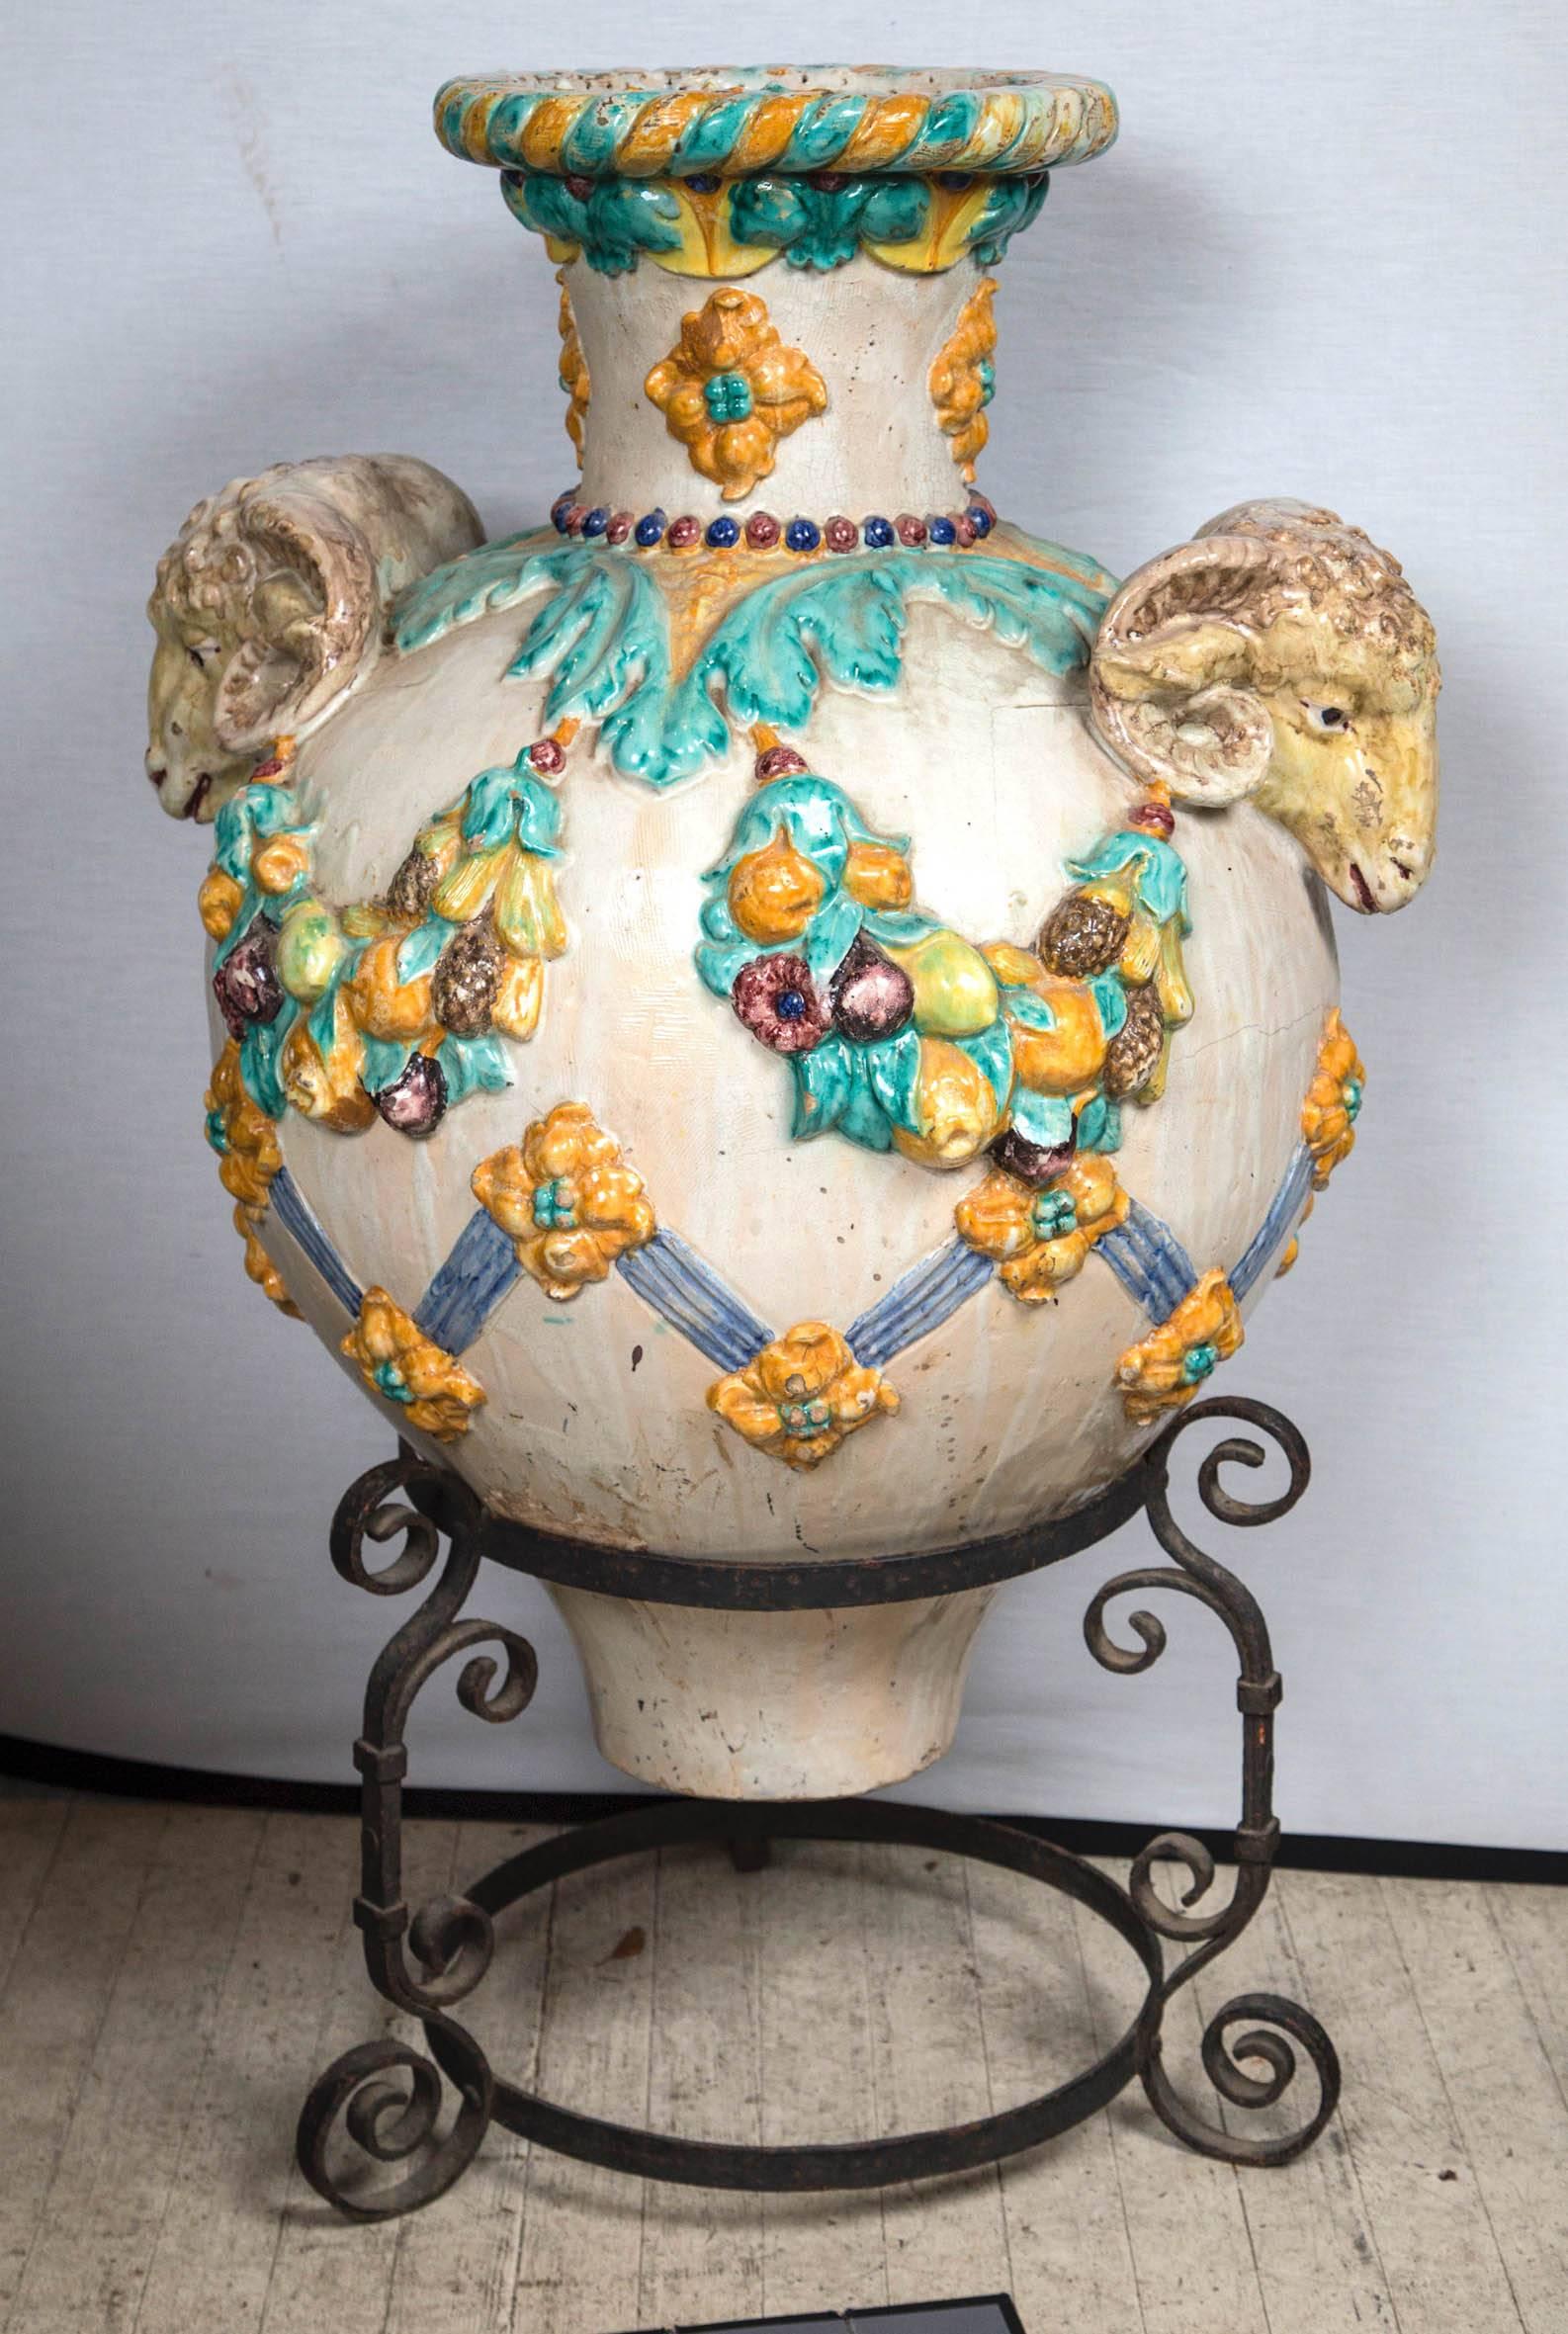 Made in Triana, Italy. This glazed urn or jar stands within a handmade iron base. Two ram's heads, garlands of fruit and stylized decoration in yellows, blues and greens, upon a cream colored body.
Underglaze blue name M. ( ?) Montalvan Triana